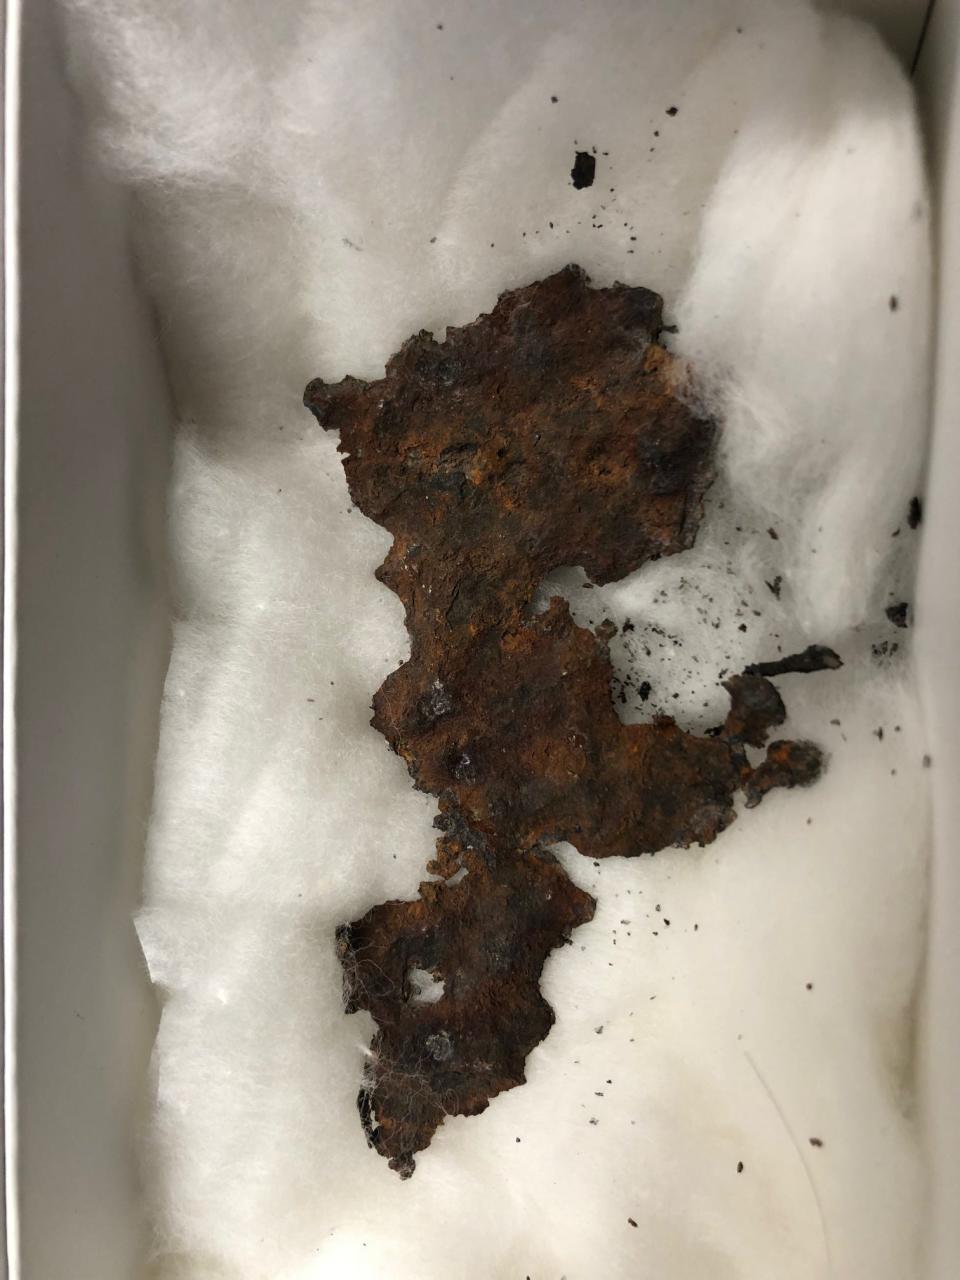 A piece of the hull for the USS Arizona that was sunk in the attack on Pearl Harbor that was added to the hull of the new version of the USS Arizona currently in production.